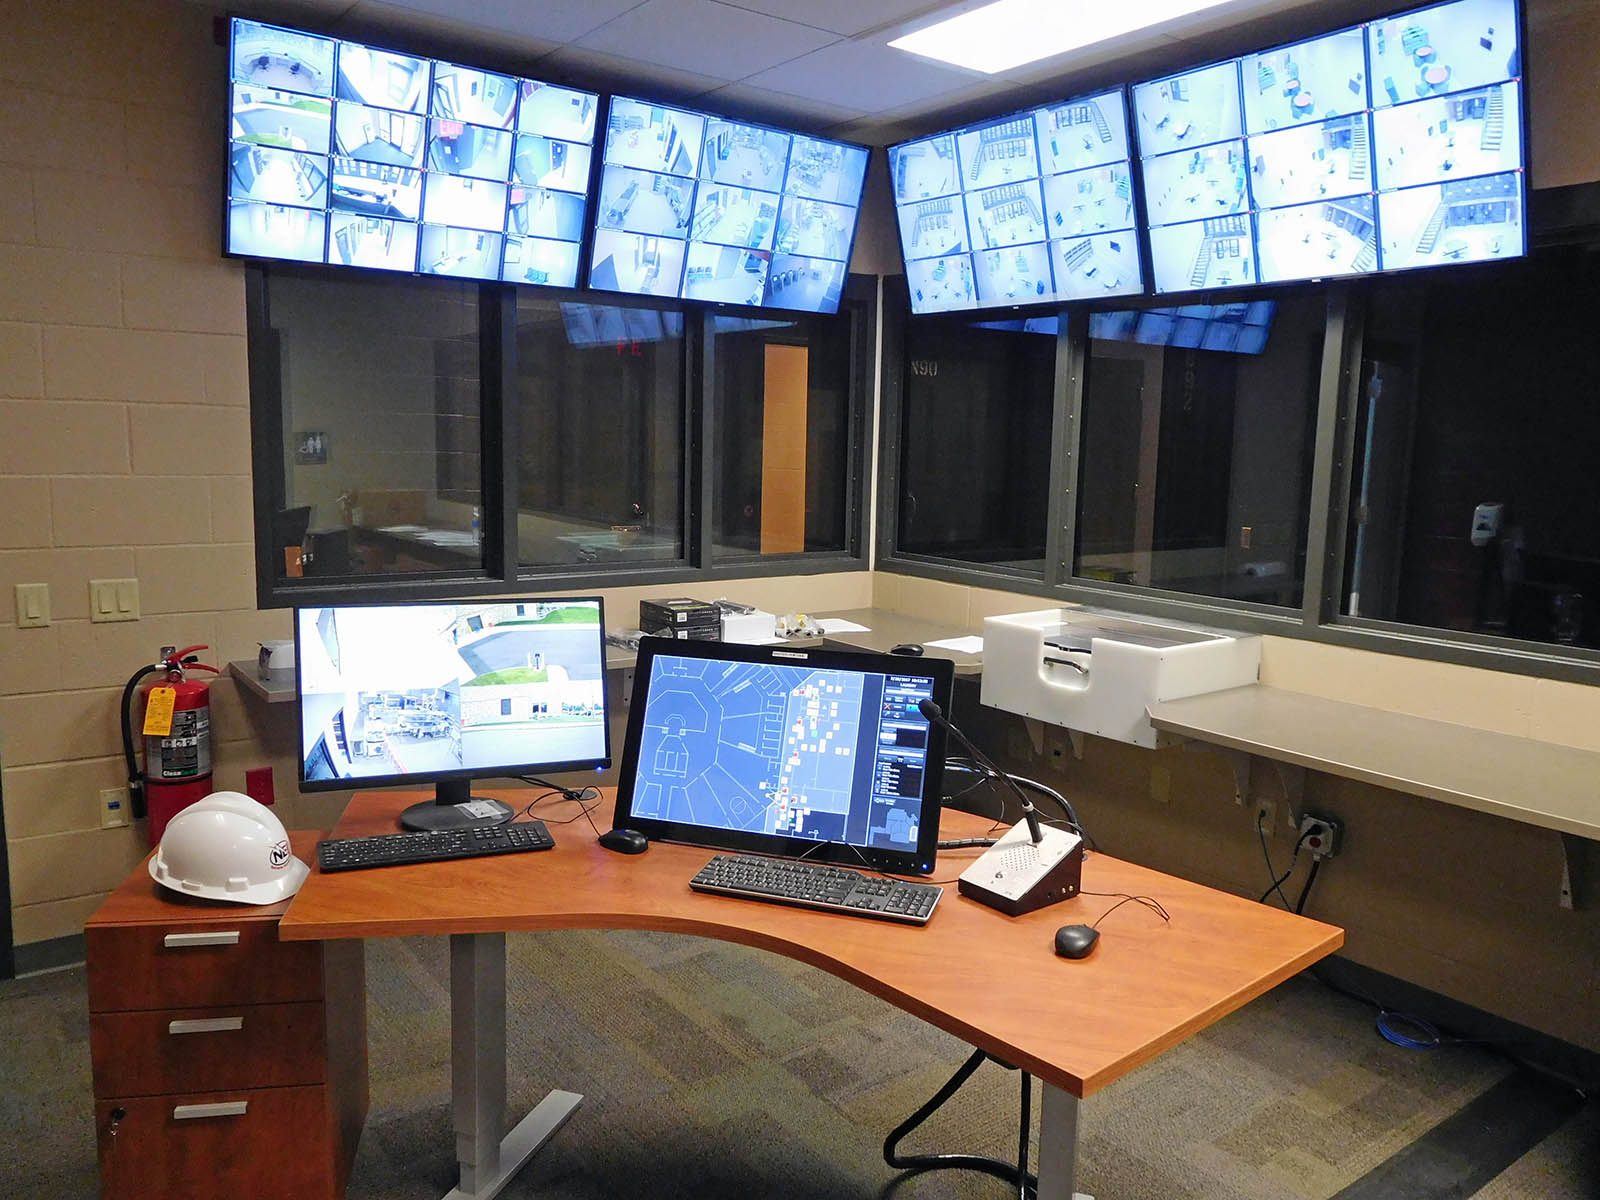 Control room with two computers on a desk, along with 4 large monitors with security camera footage on display